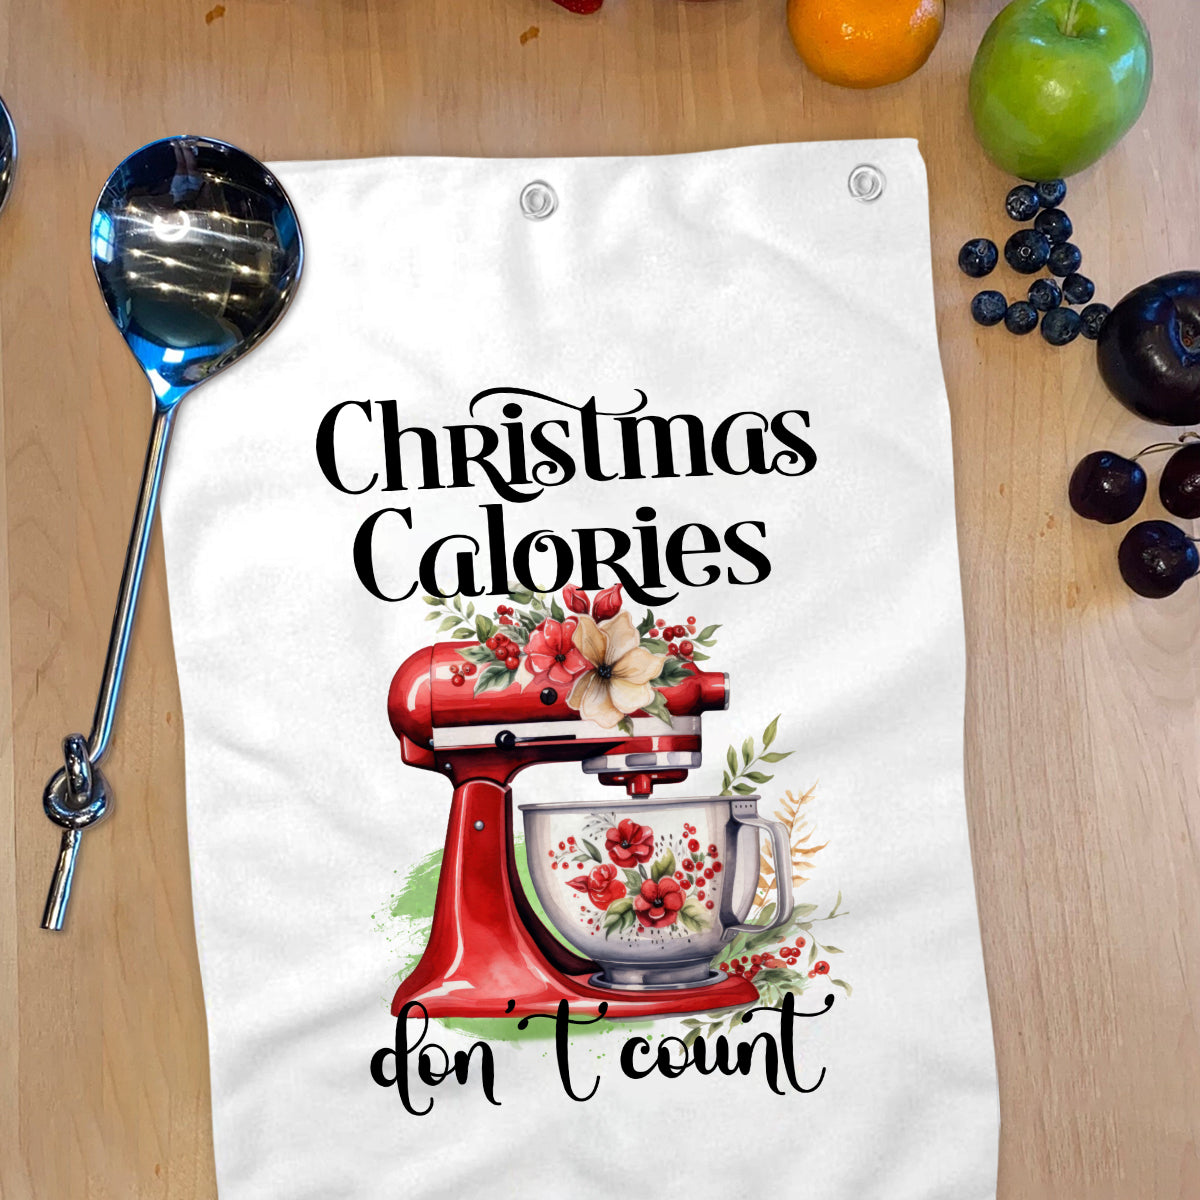 Christmas Calories Don't Count - Personalized Baking Towel